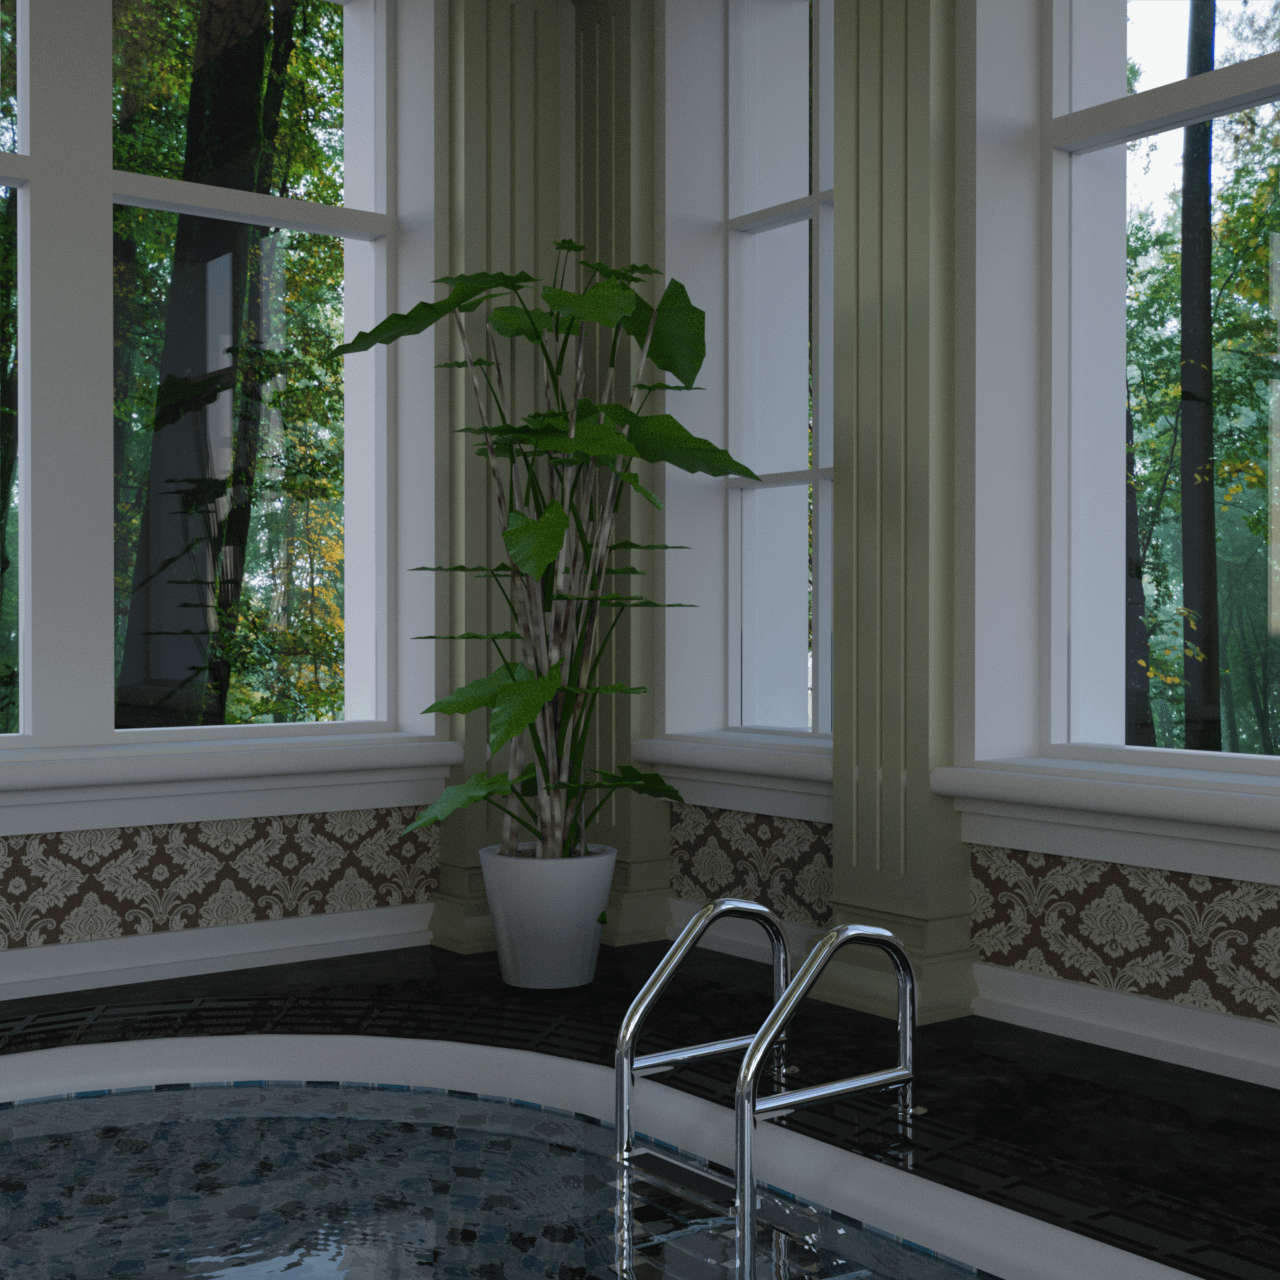 Pool entry with decoration such as plants in the background